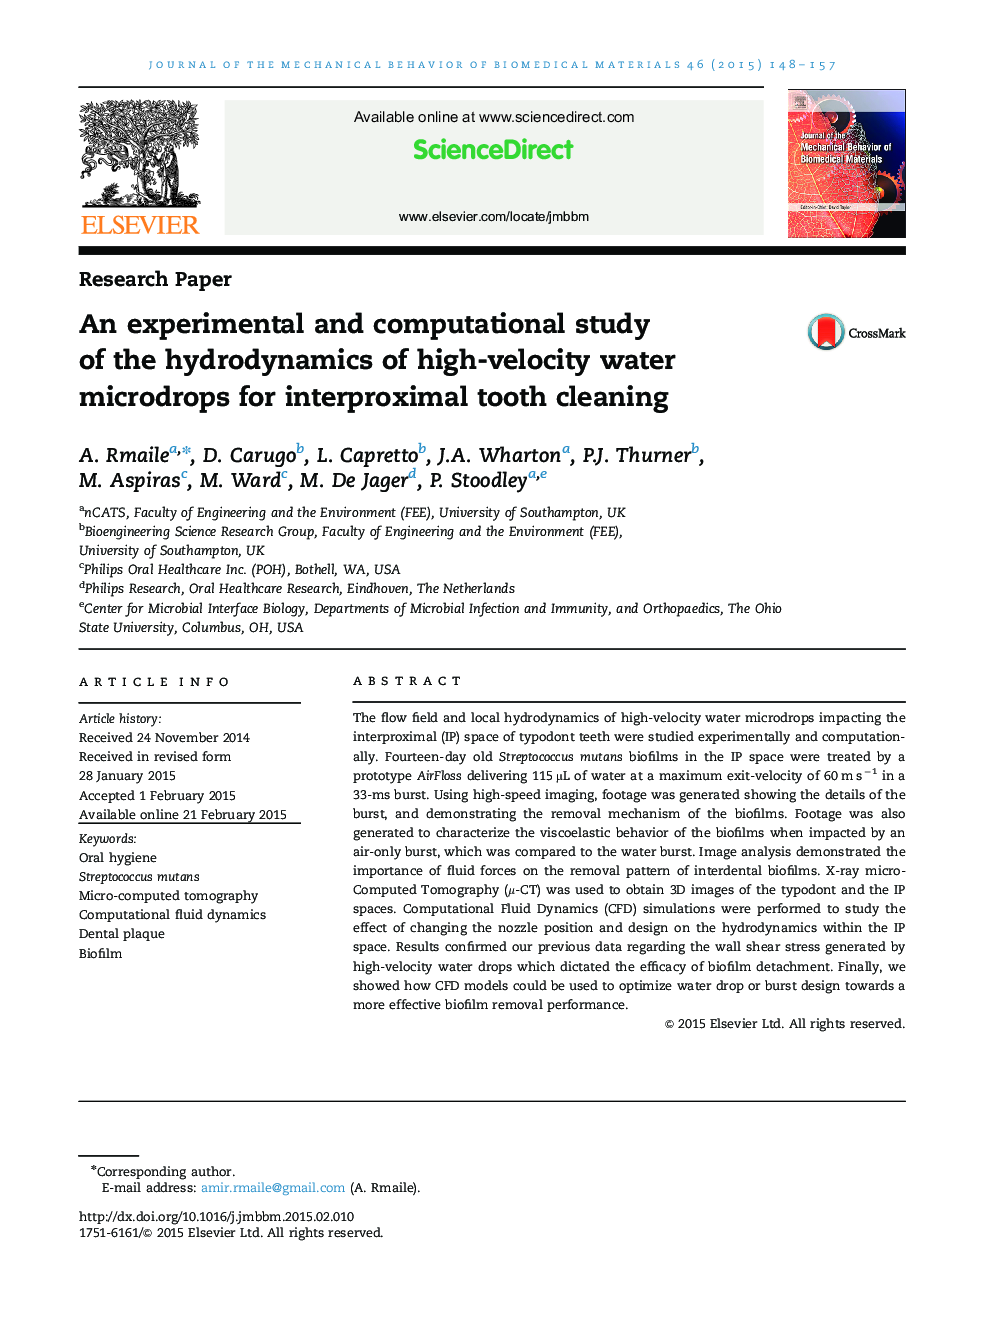 An experimental and computational study of the hydrodynamics of high-velocity water microdrops for interproximal tooth cleaning